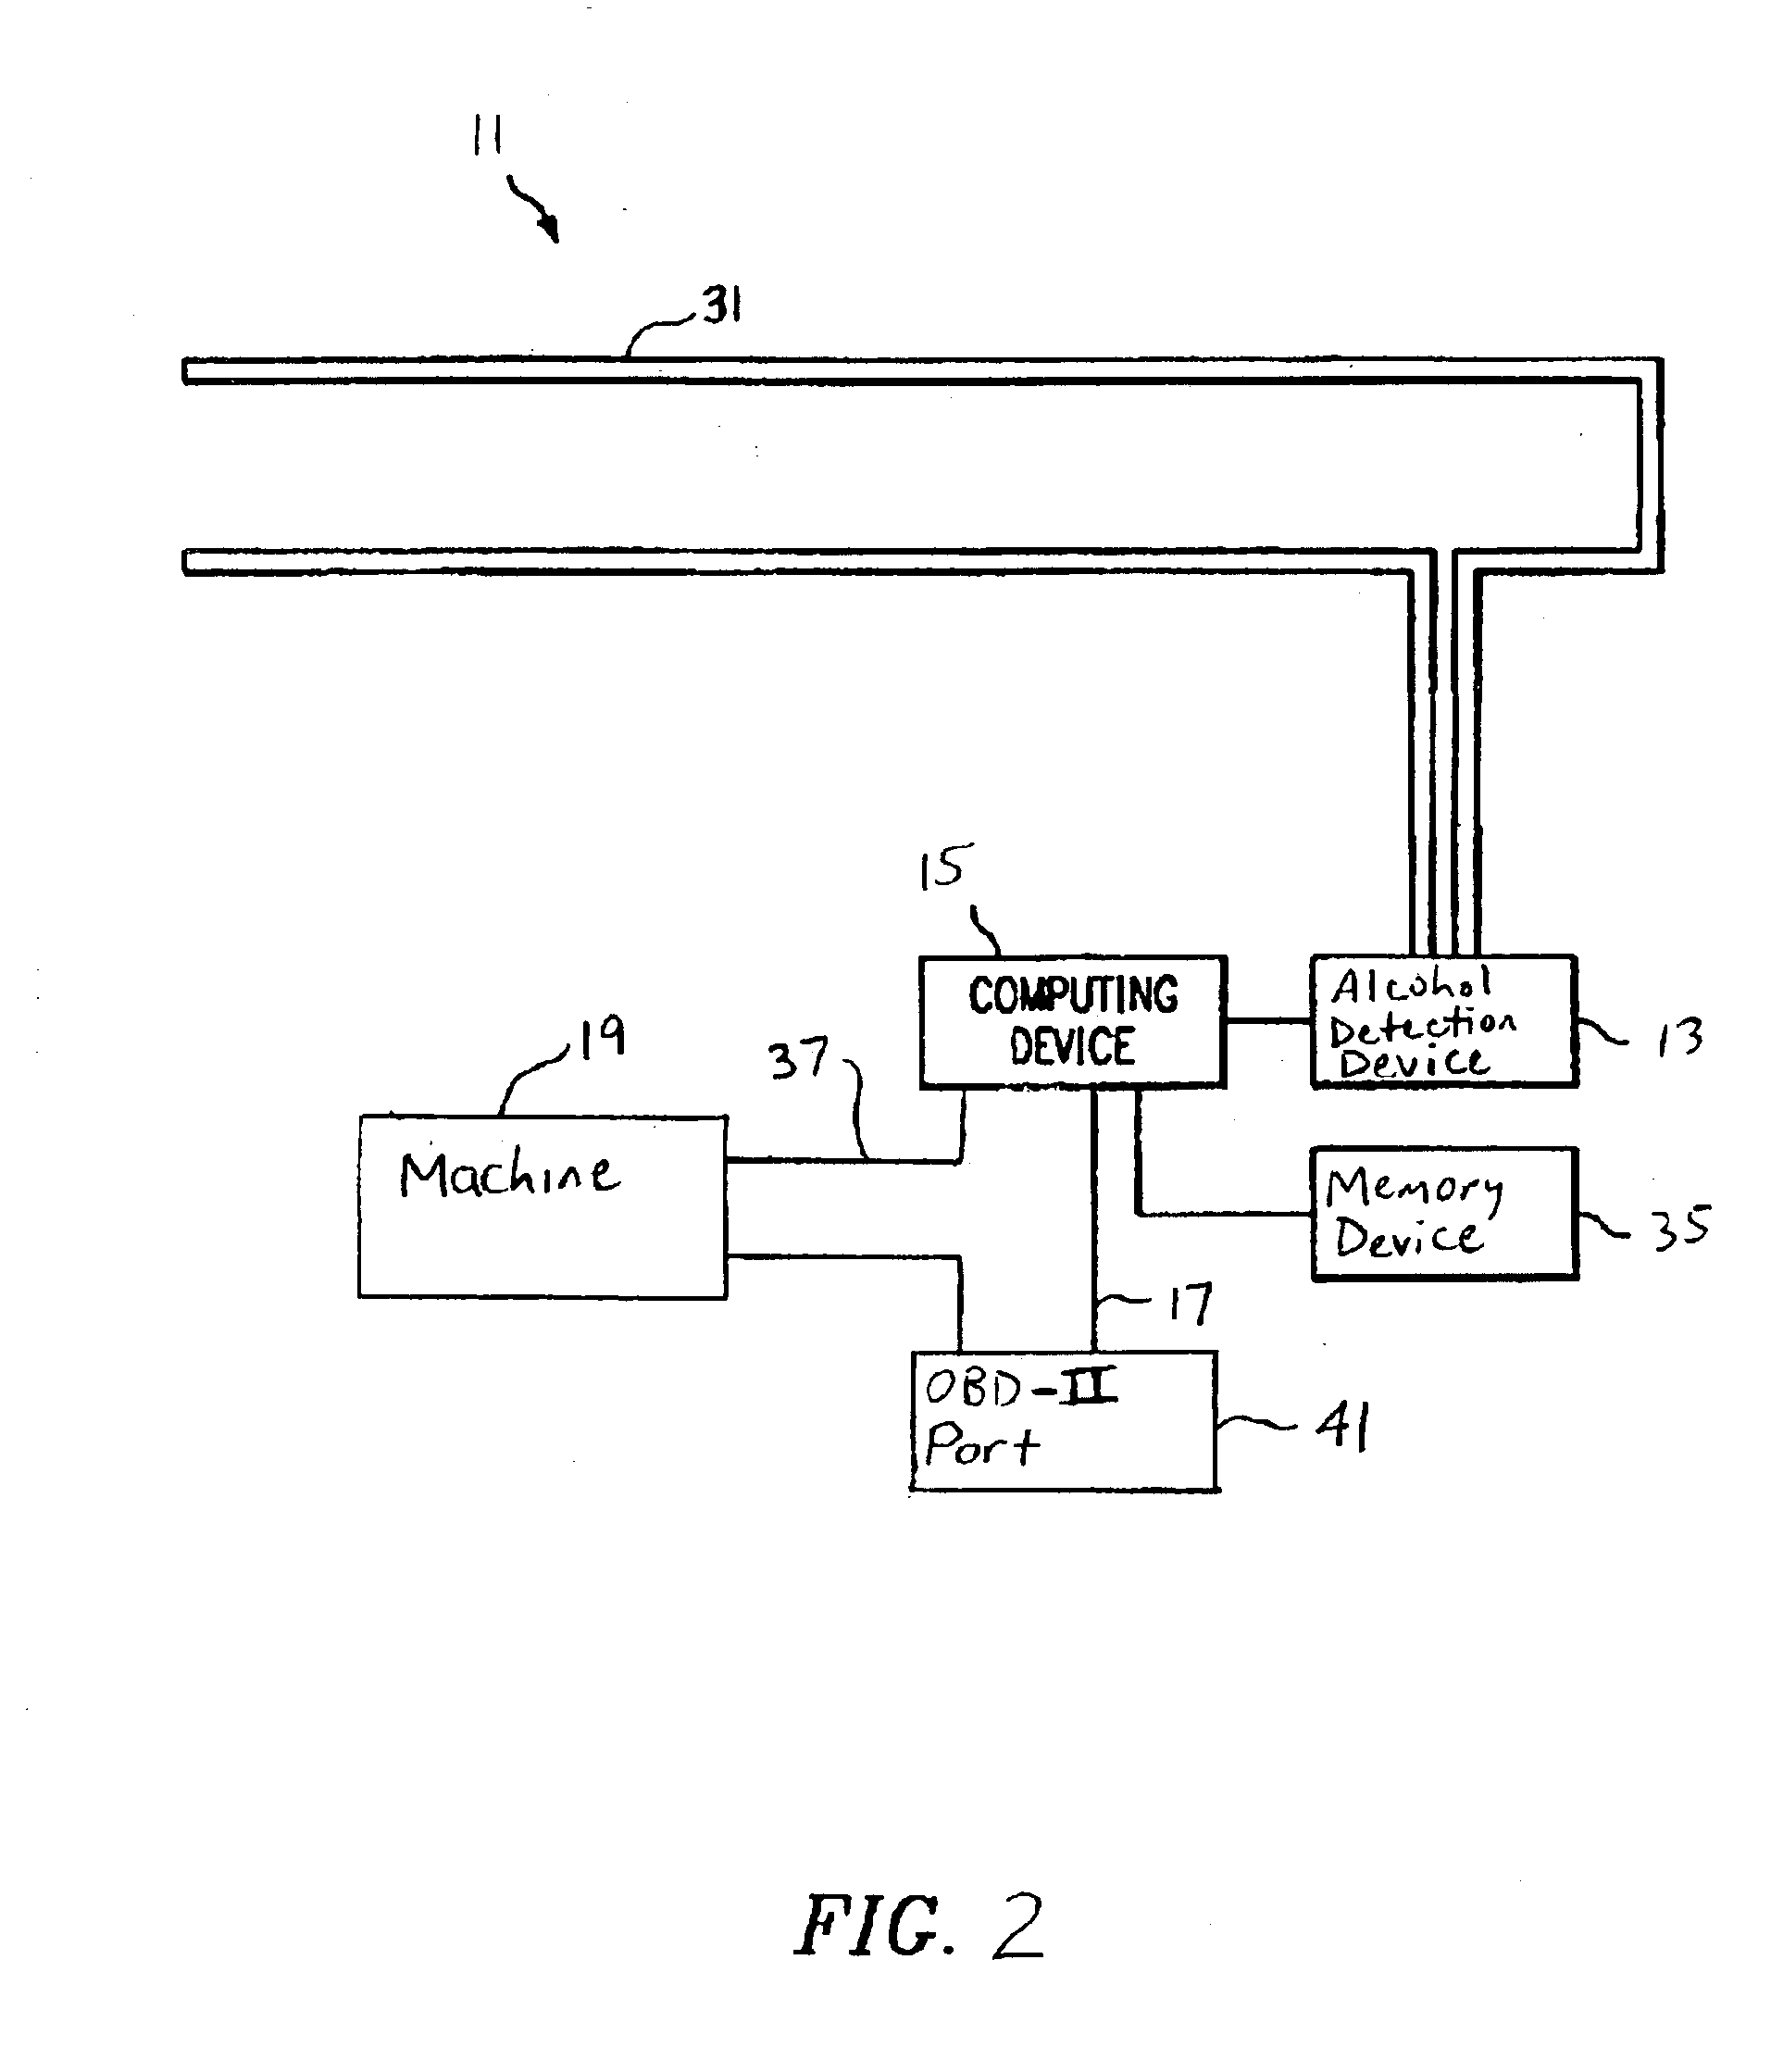 Sobriety testing apparatus having OBD-II connection capability